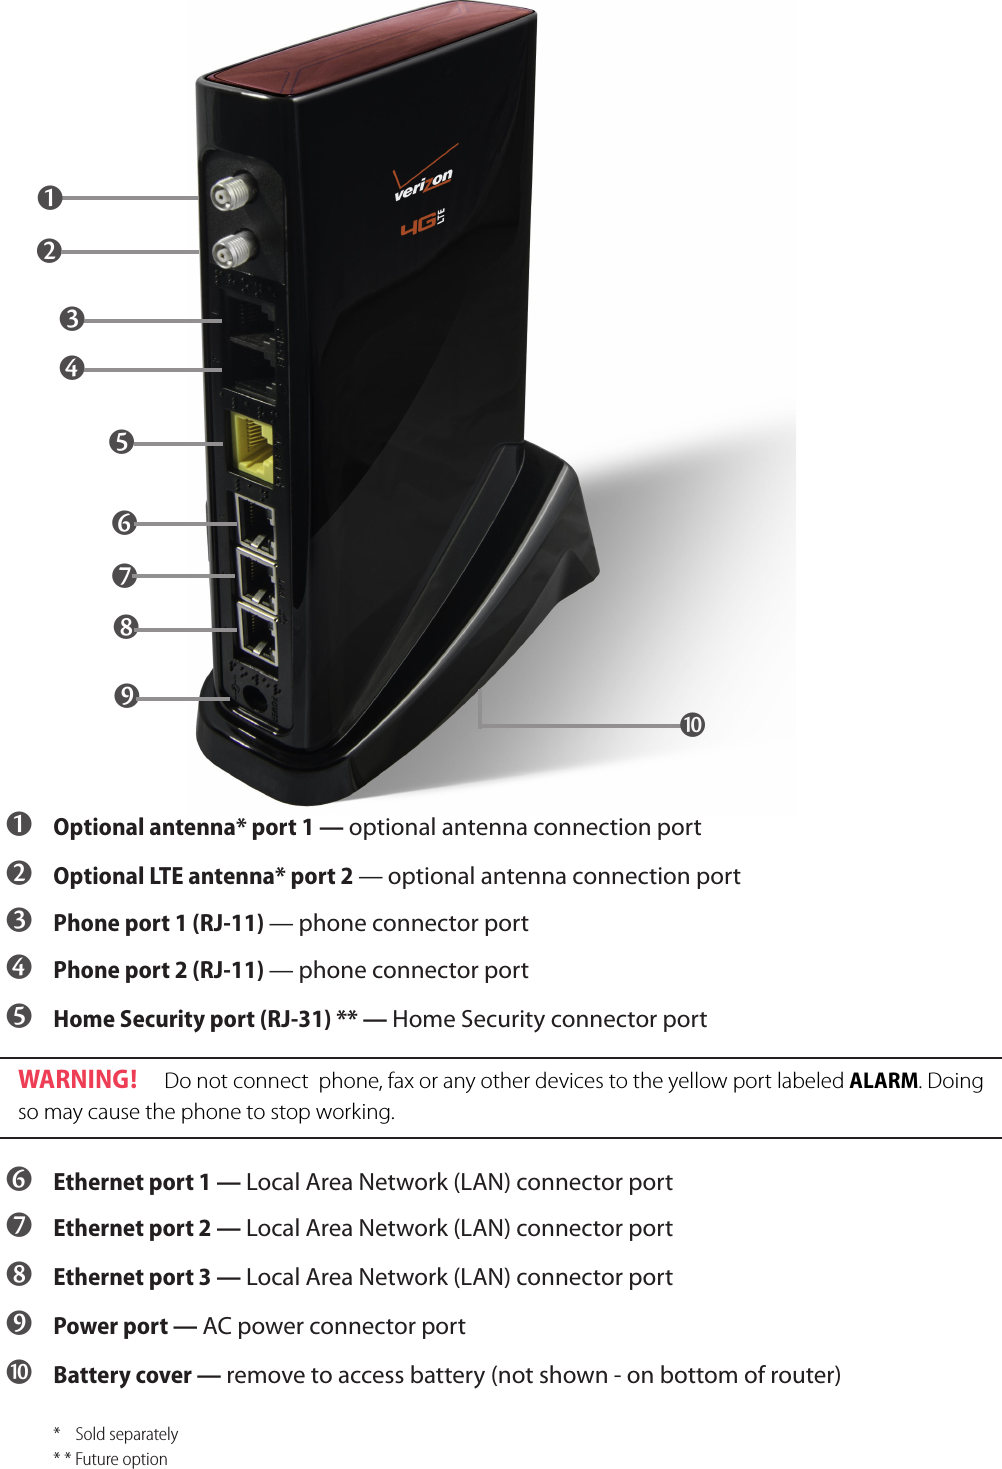 4 ➊ Optional antenna* port 1 — optional antenna connection port ➋ Optional LTE antenna* port 2 — optional antenna connection port ➌ Phone port 1 (RJ-11) — phone connector port  ➍ Phone port 2 (RJ-11) — phone connector port ➎ Home Security port (RJ-31) ** — Home Security connector portWARNING !  Do not connect  phone, fax or any other devices to the yellow port labeled ALARM. Doing so may cause the phone to stop working.  ➏ Ethernet port 1 — Local Area Network (LAN) connector port ➐ Ethernet port 2 — Local Area Network (LAN) connector port ➑ Ethernet port 3 — Local Area Network (LAN) connector port ➒ Power port — AC power connector port ➓ Battery cover — remove to access battery (not shown - on bottom of router)  *    Sold separately  * * Future option    ➊ ➋ ➌ ➍ ➎ ➐ ➑ ➒ ➏ ➓  